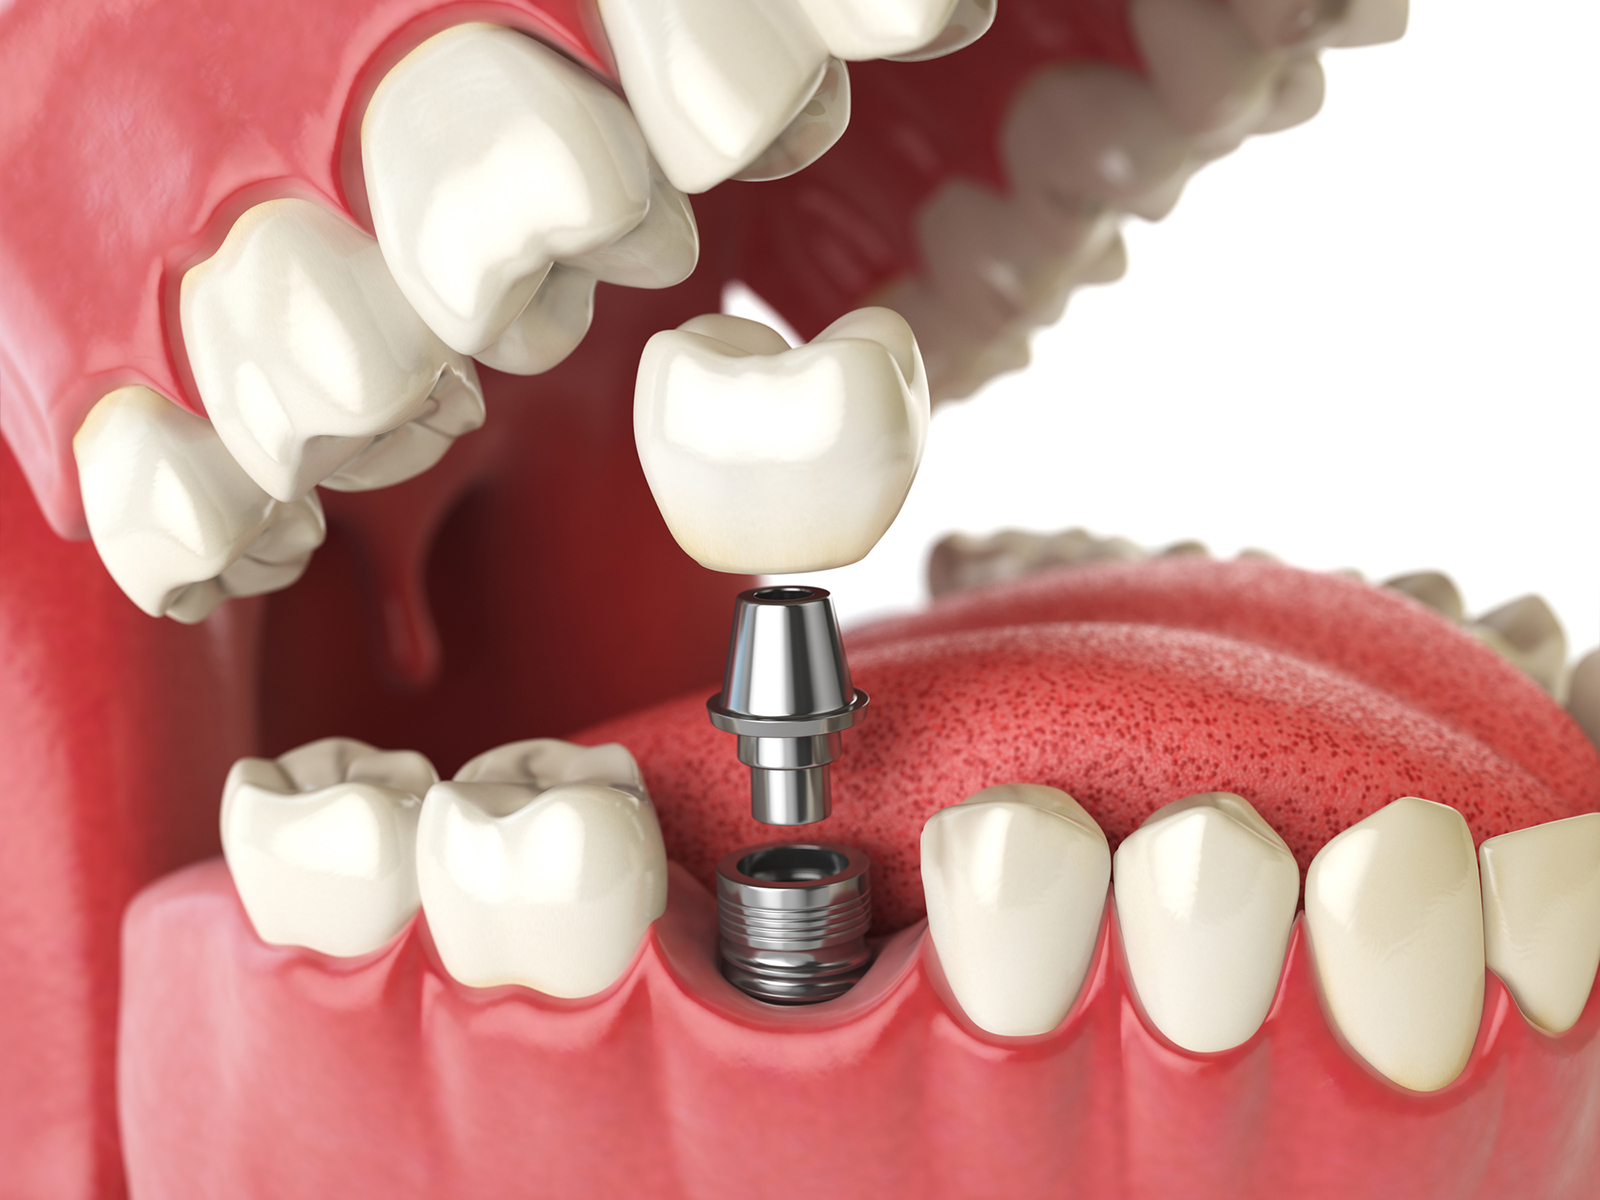 How are dental implants secured?